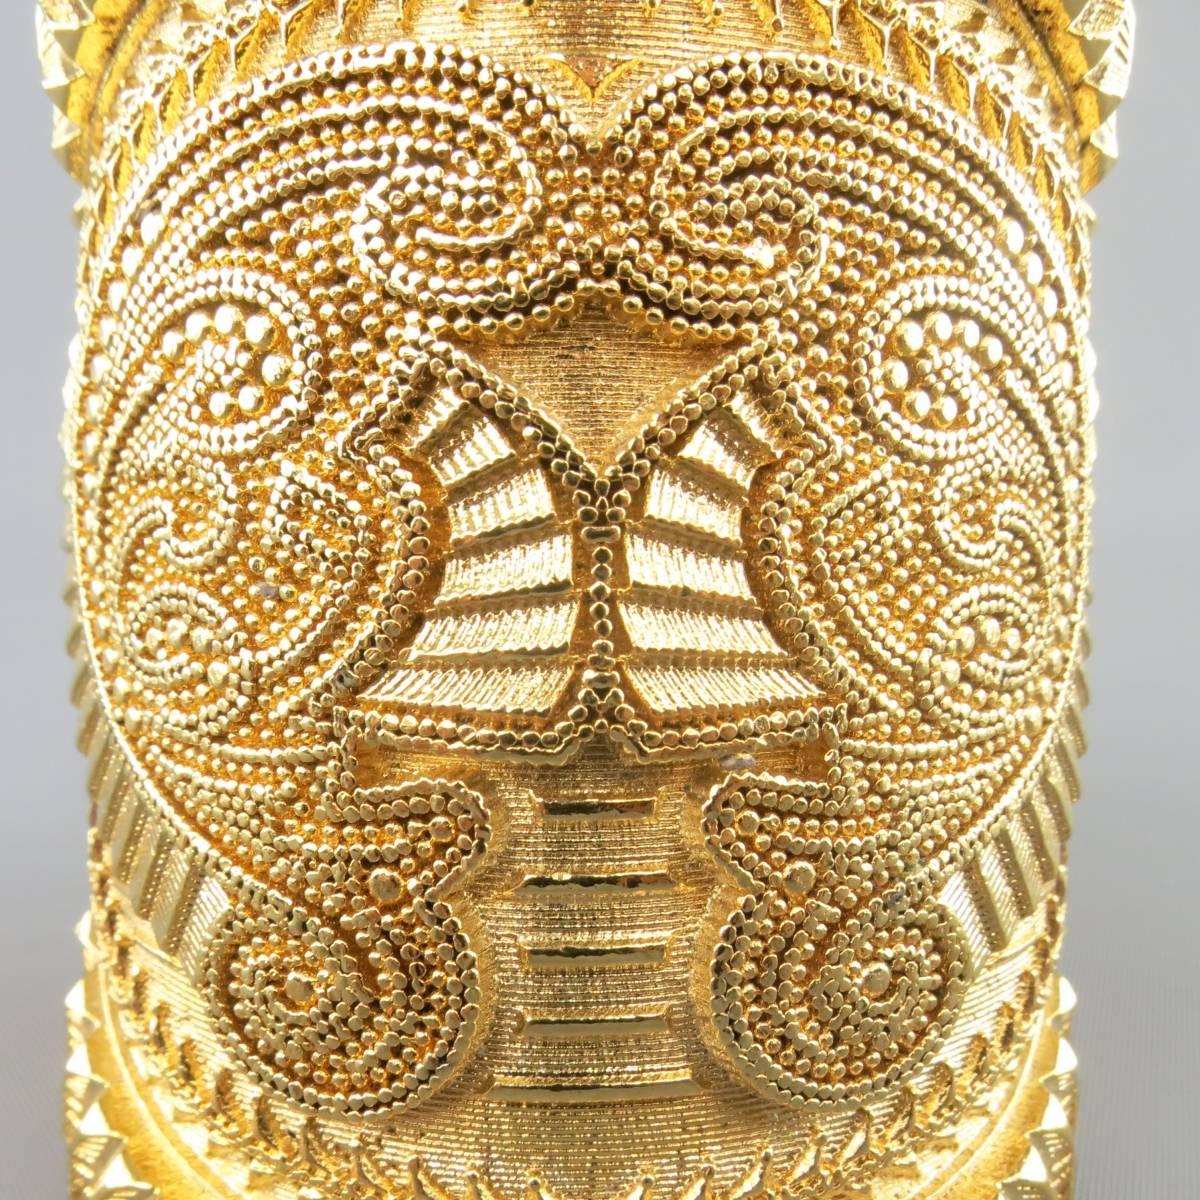 BALMAIN 2012 Collection cuff by designer Stephanie Manchette comes in a yellow gold tone brass with intricate engraving throughout. Includes box, dust bag, and authentication card.
 
New with Tags.
 
Height: 3.75 in.
Around: 8.5 in.
Fits: 7 in.
